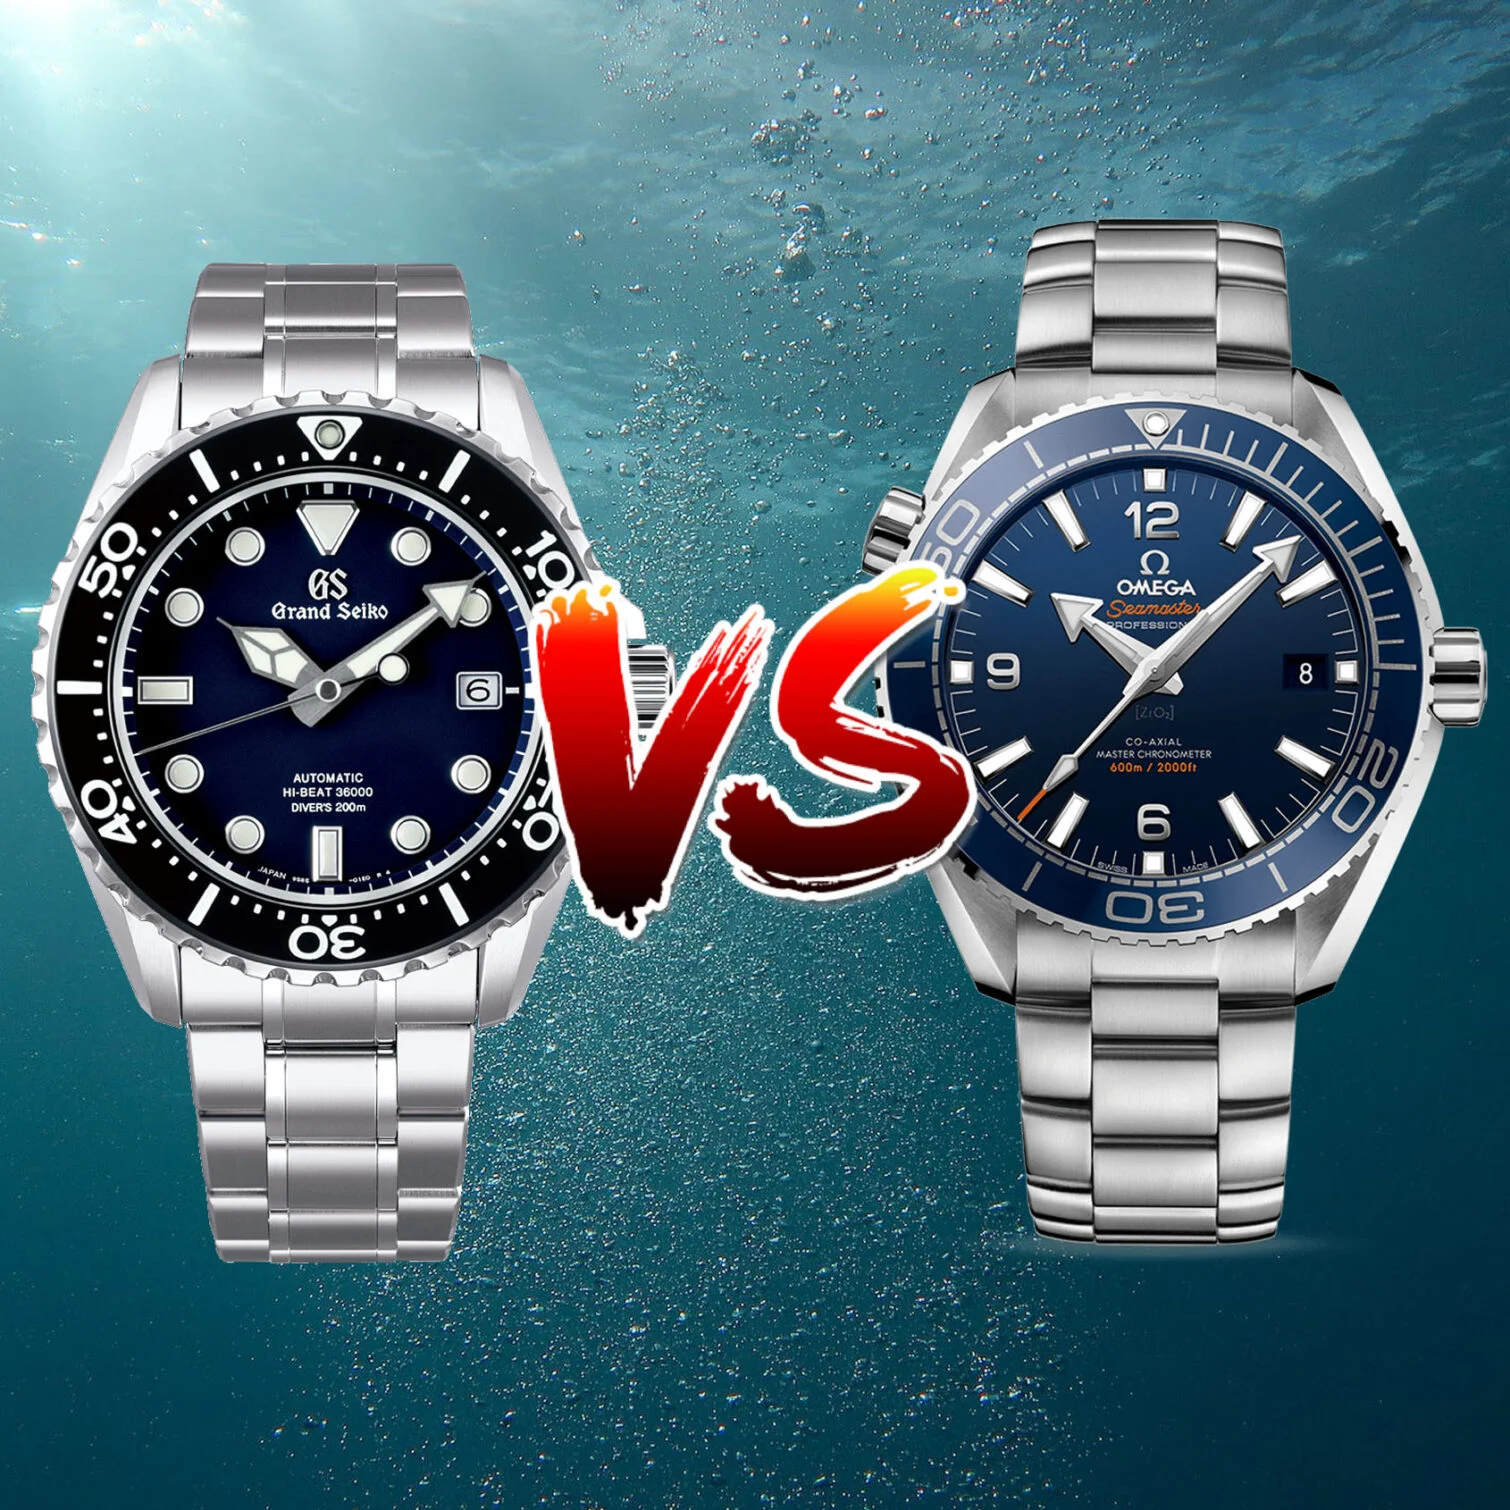 VERSUS: The Grand Seiko SBGH289 and Omega Planet Ocean